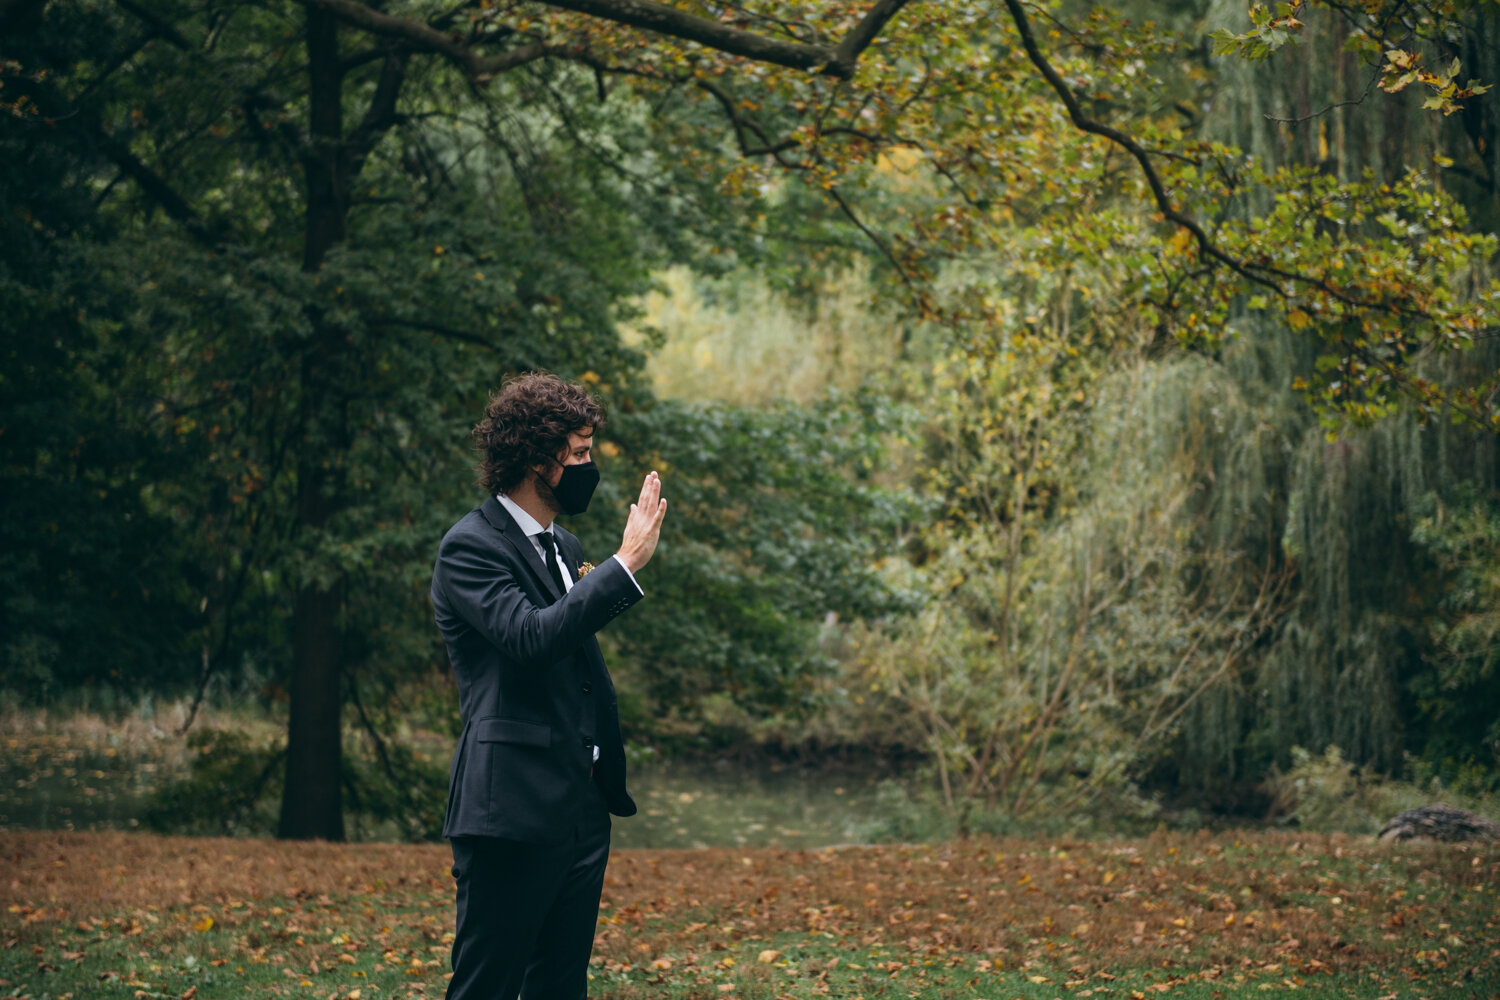 Groom stands in Central Park with trees behind him. He is wearing a mask and holding his hand up in a wave looking off camera.

Central Park Wedding Photography. Williamsburg Bridge Bridal Portraits. Luxury NYC Wedding Photographer. Manhattan Micro Wedding.